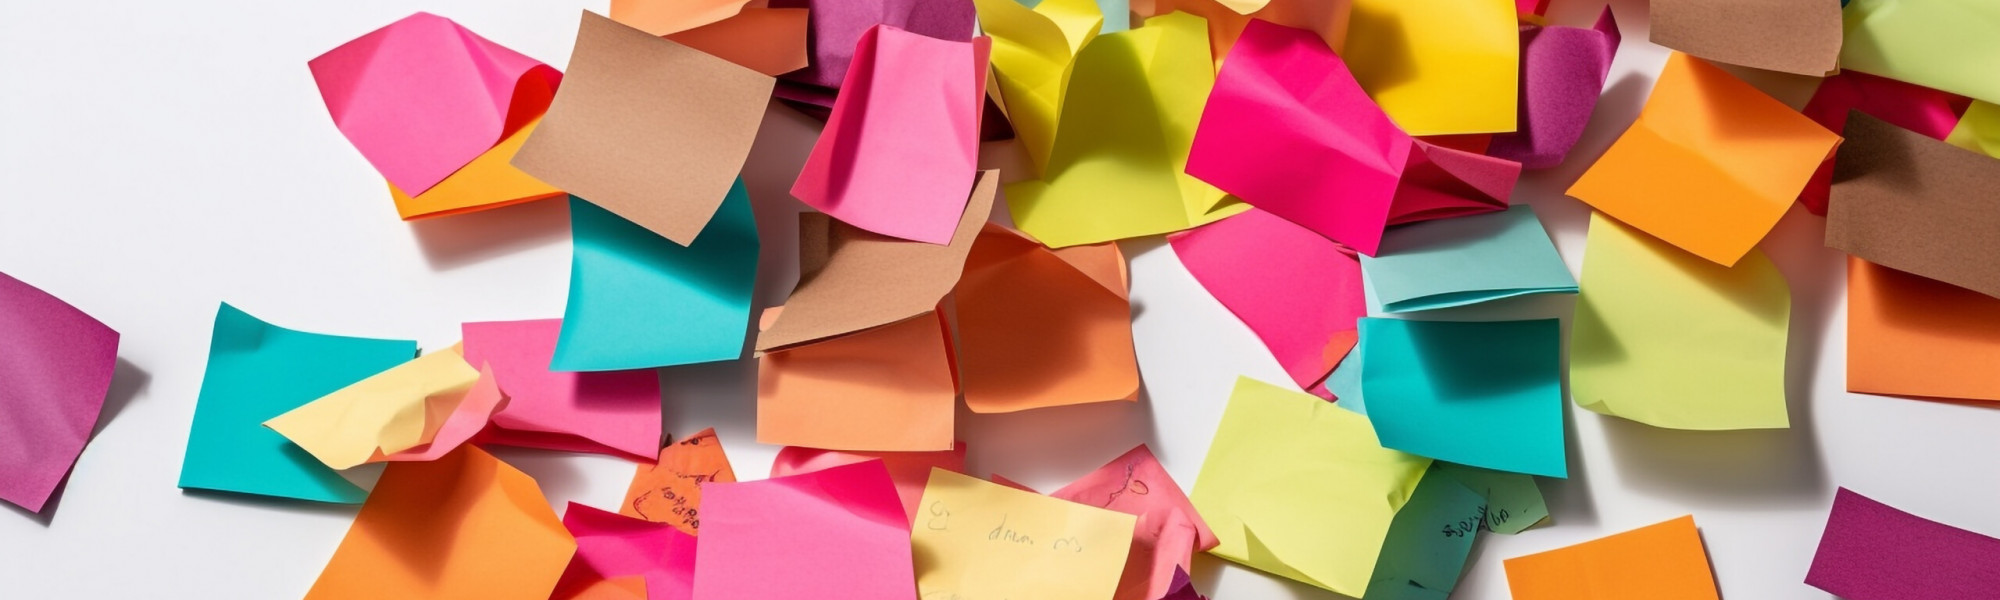 A messy heap of colorful adhesive notes generated by artificial intelligence